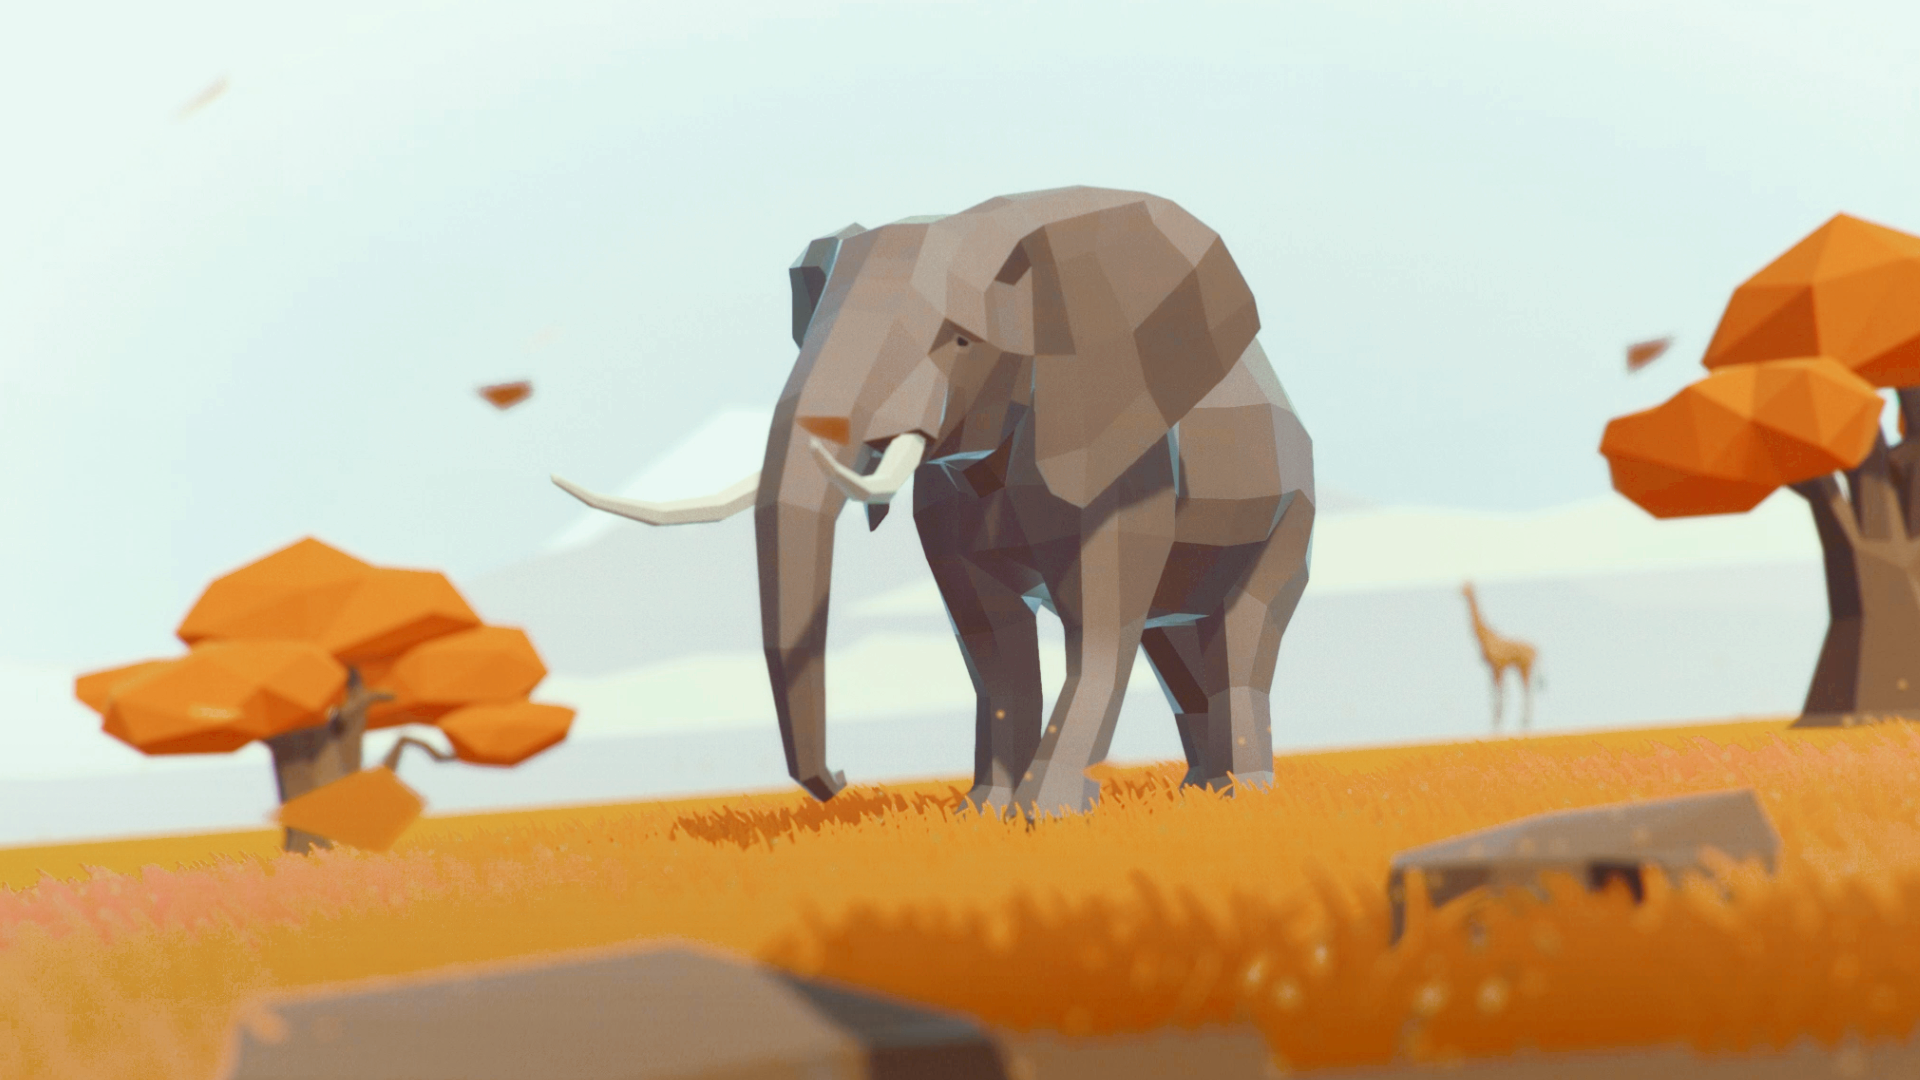 Low Poly Animals on Behance